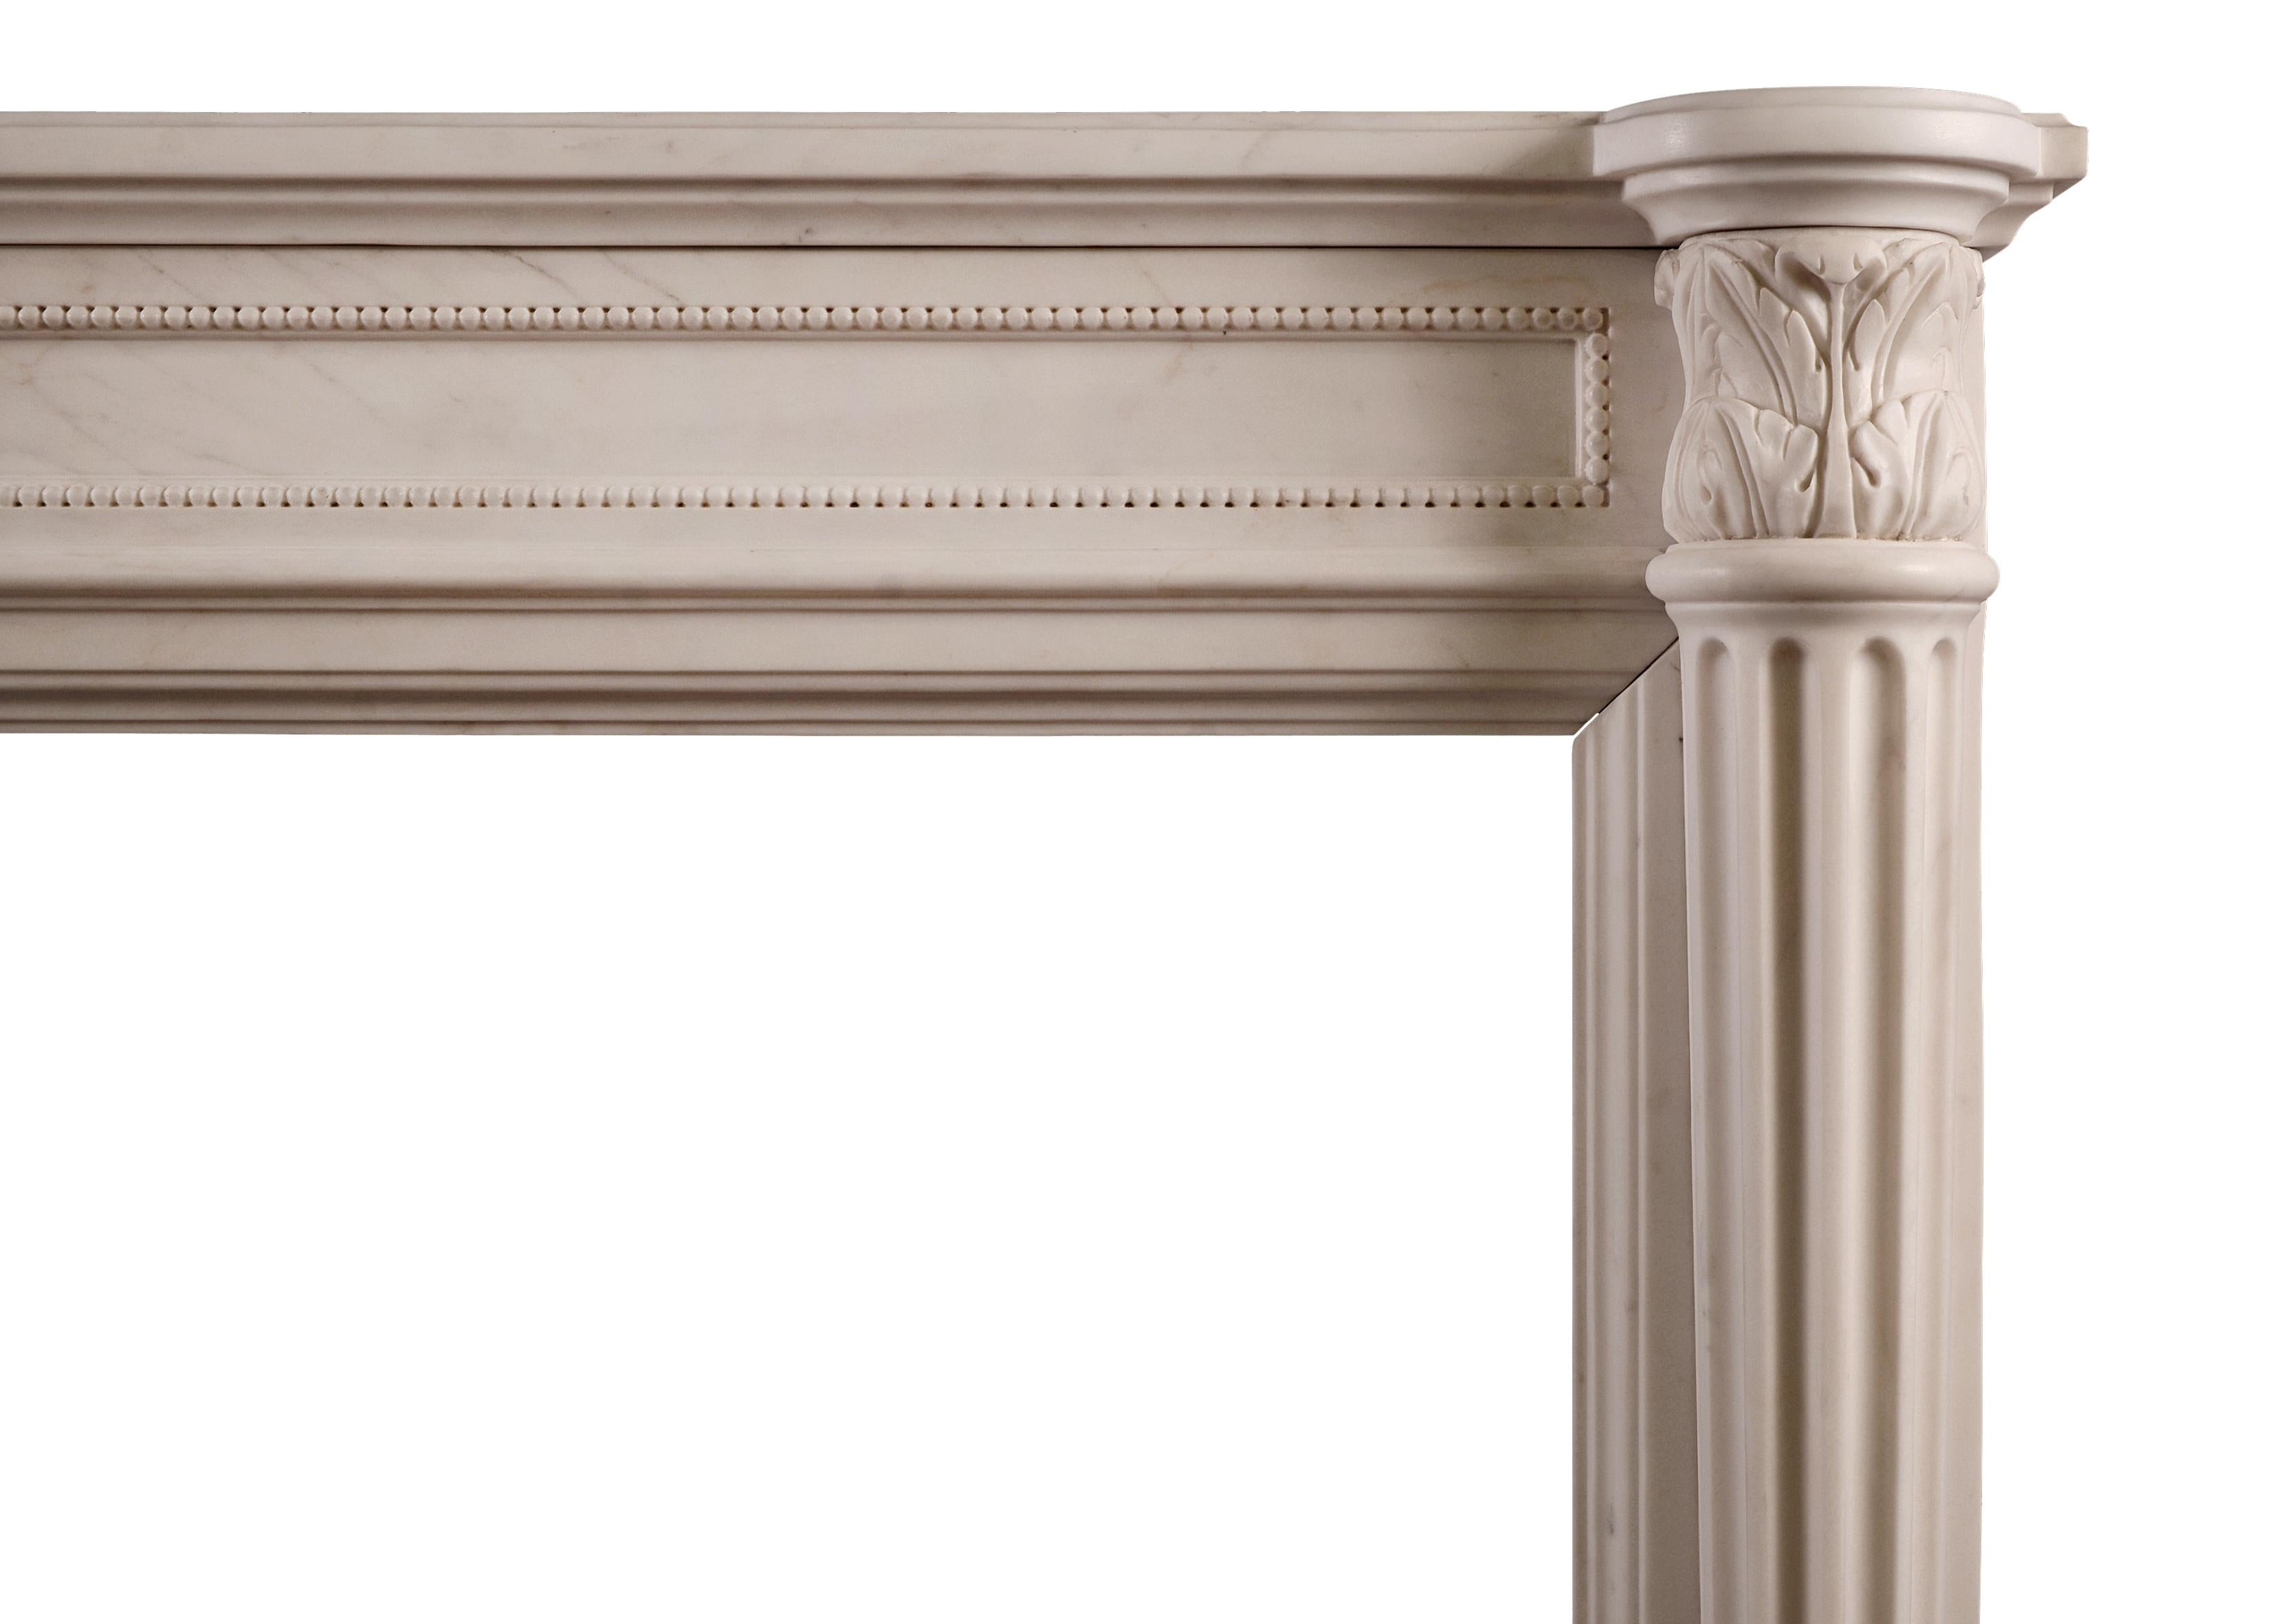 An elegant French Louis XVI style white marble fireplace, with panelled and beaded frieze, tapering half round fluted columns with carved acanthus leaf capitals. A copy of an earlier piece.

N.B. May be subject to an extended lead time, please